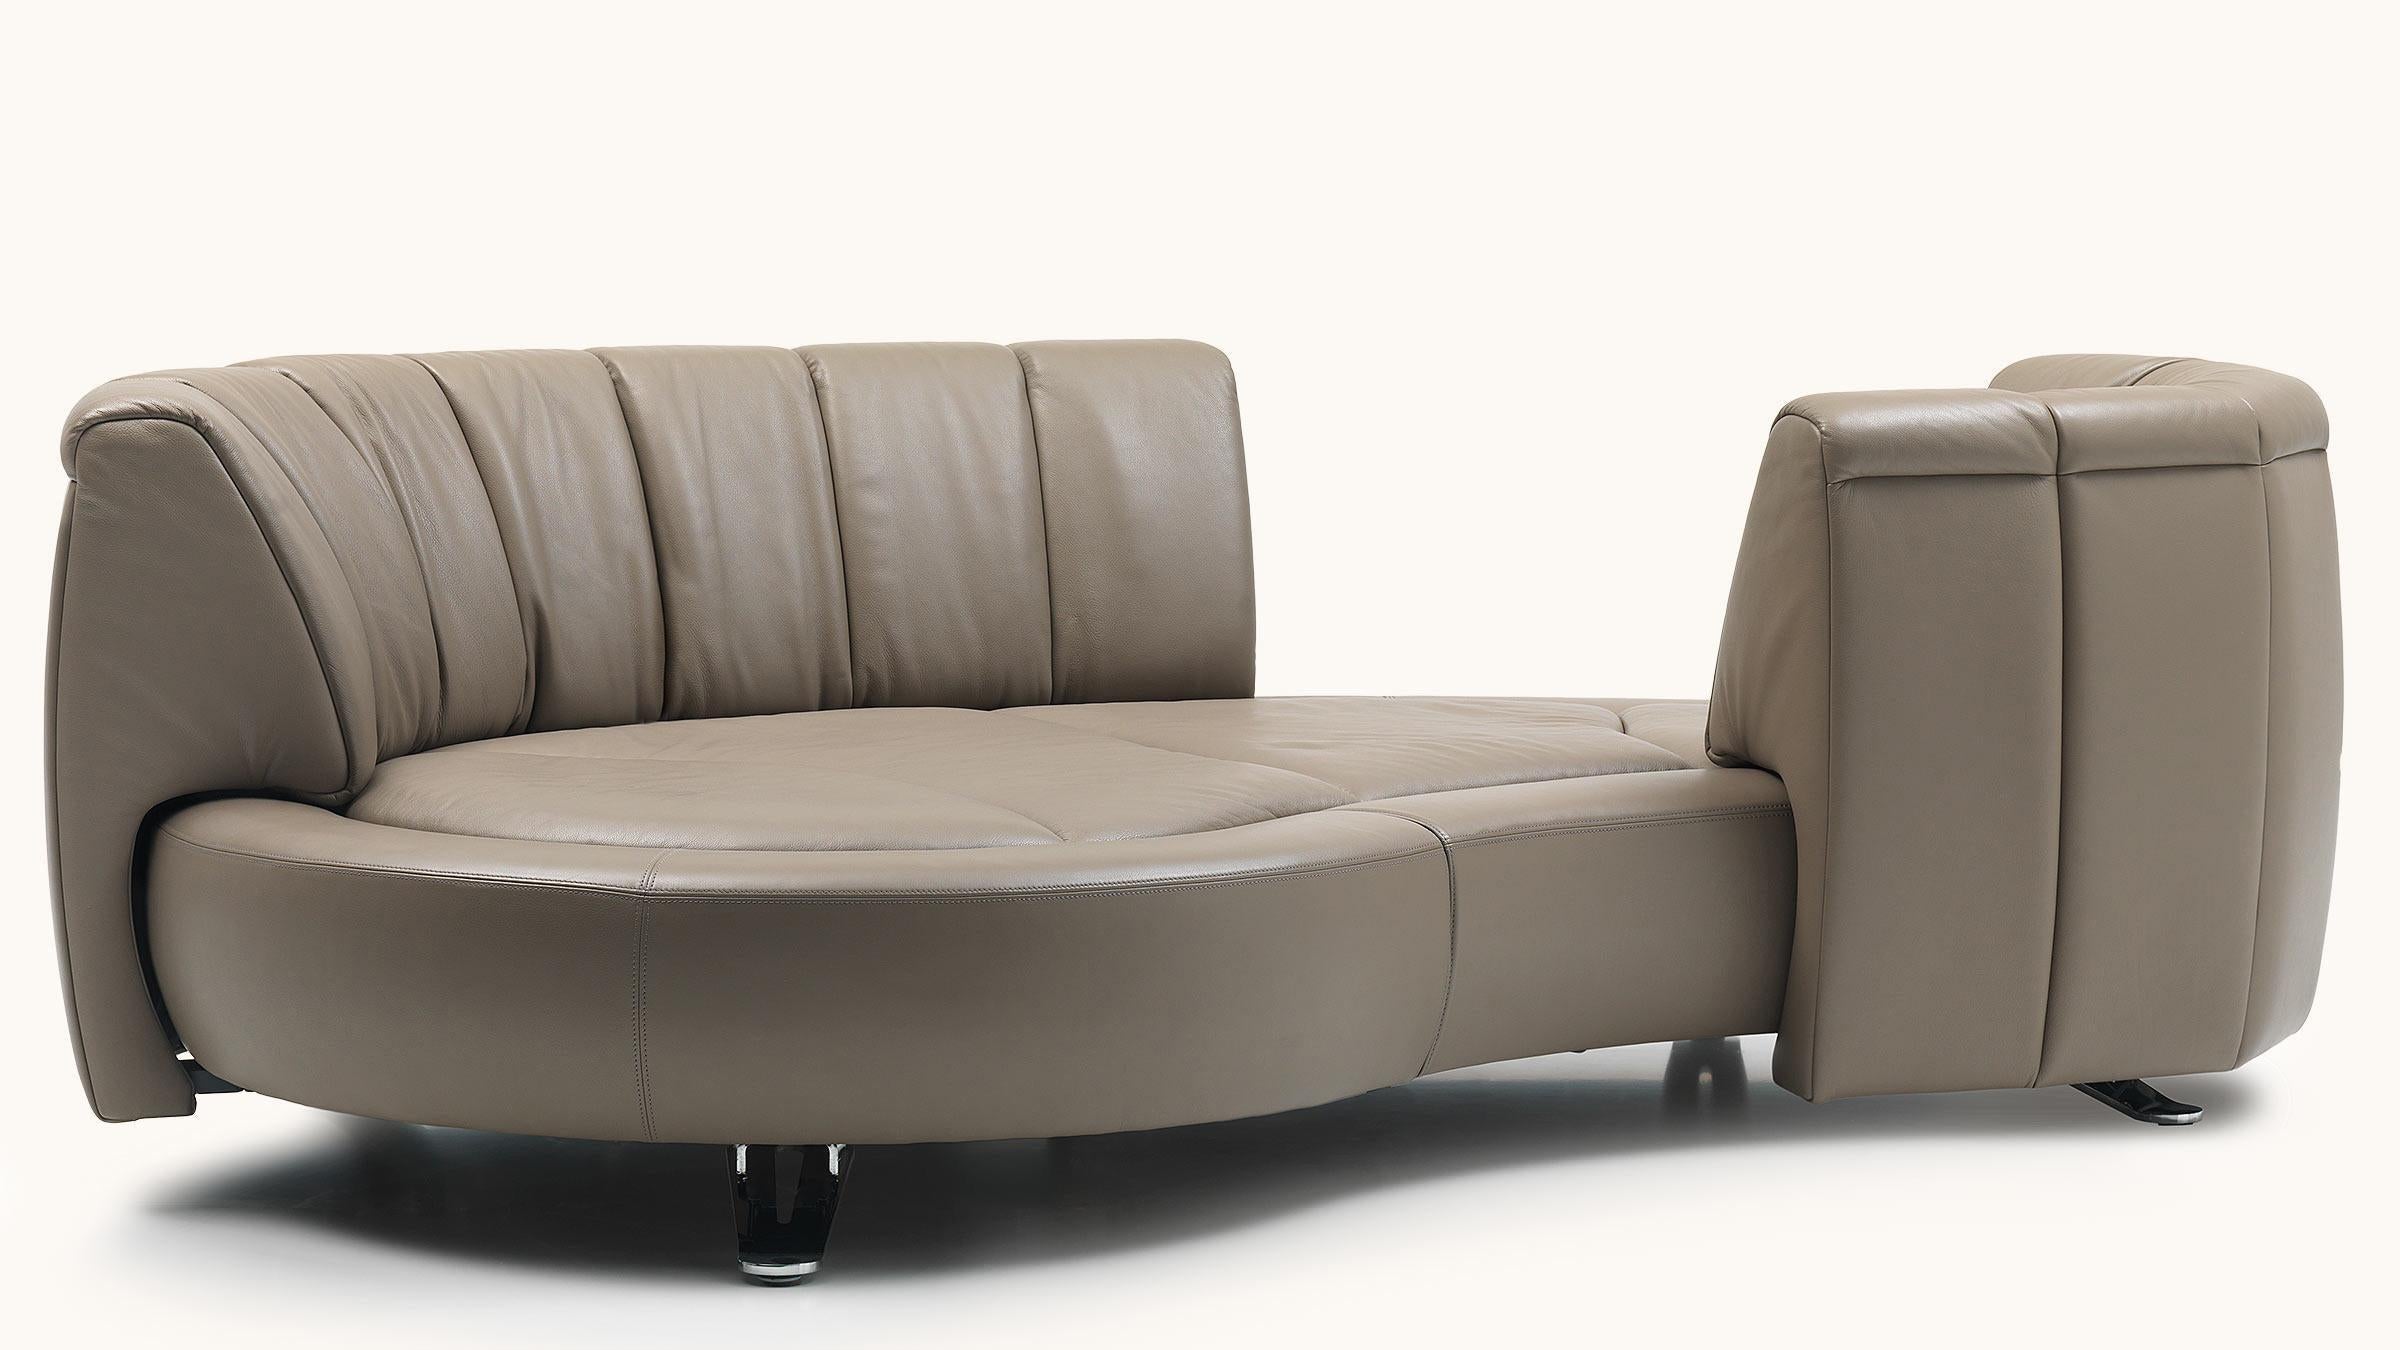 modular ds-164/29 sofa by de sede with the original leather cover in off white.